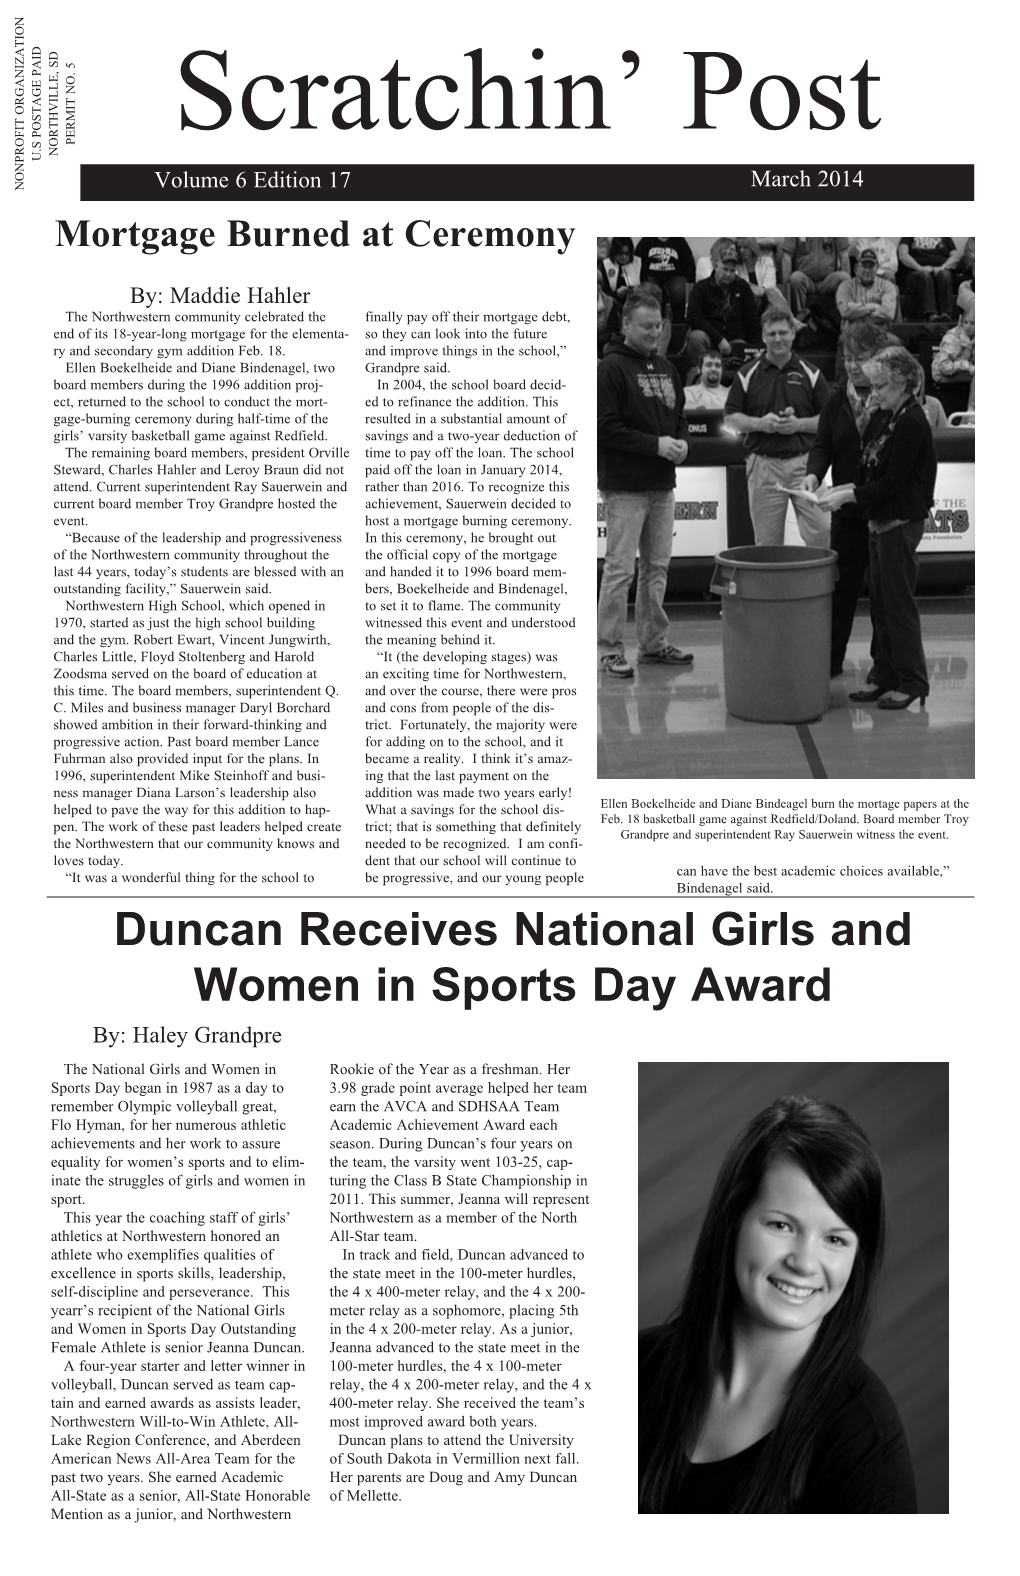 Duncan Receives National Girls and Women in Sports Day Award By: Haley Grandpre the National Girls and Women in Rookie of the Year As a Freshman